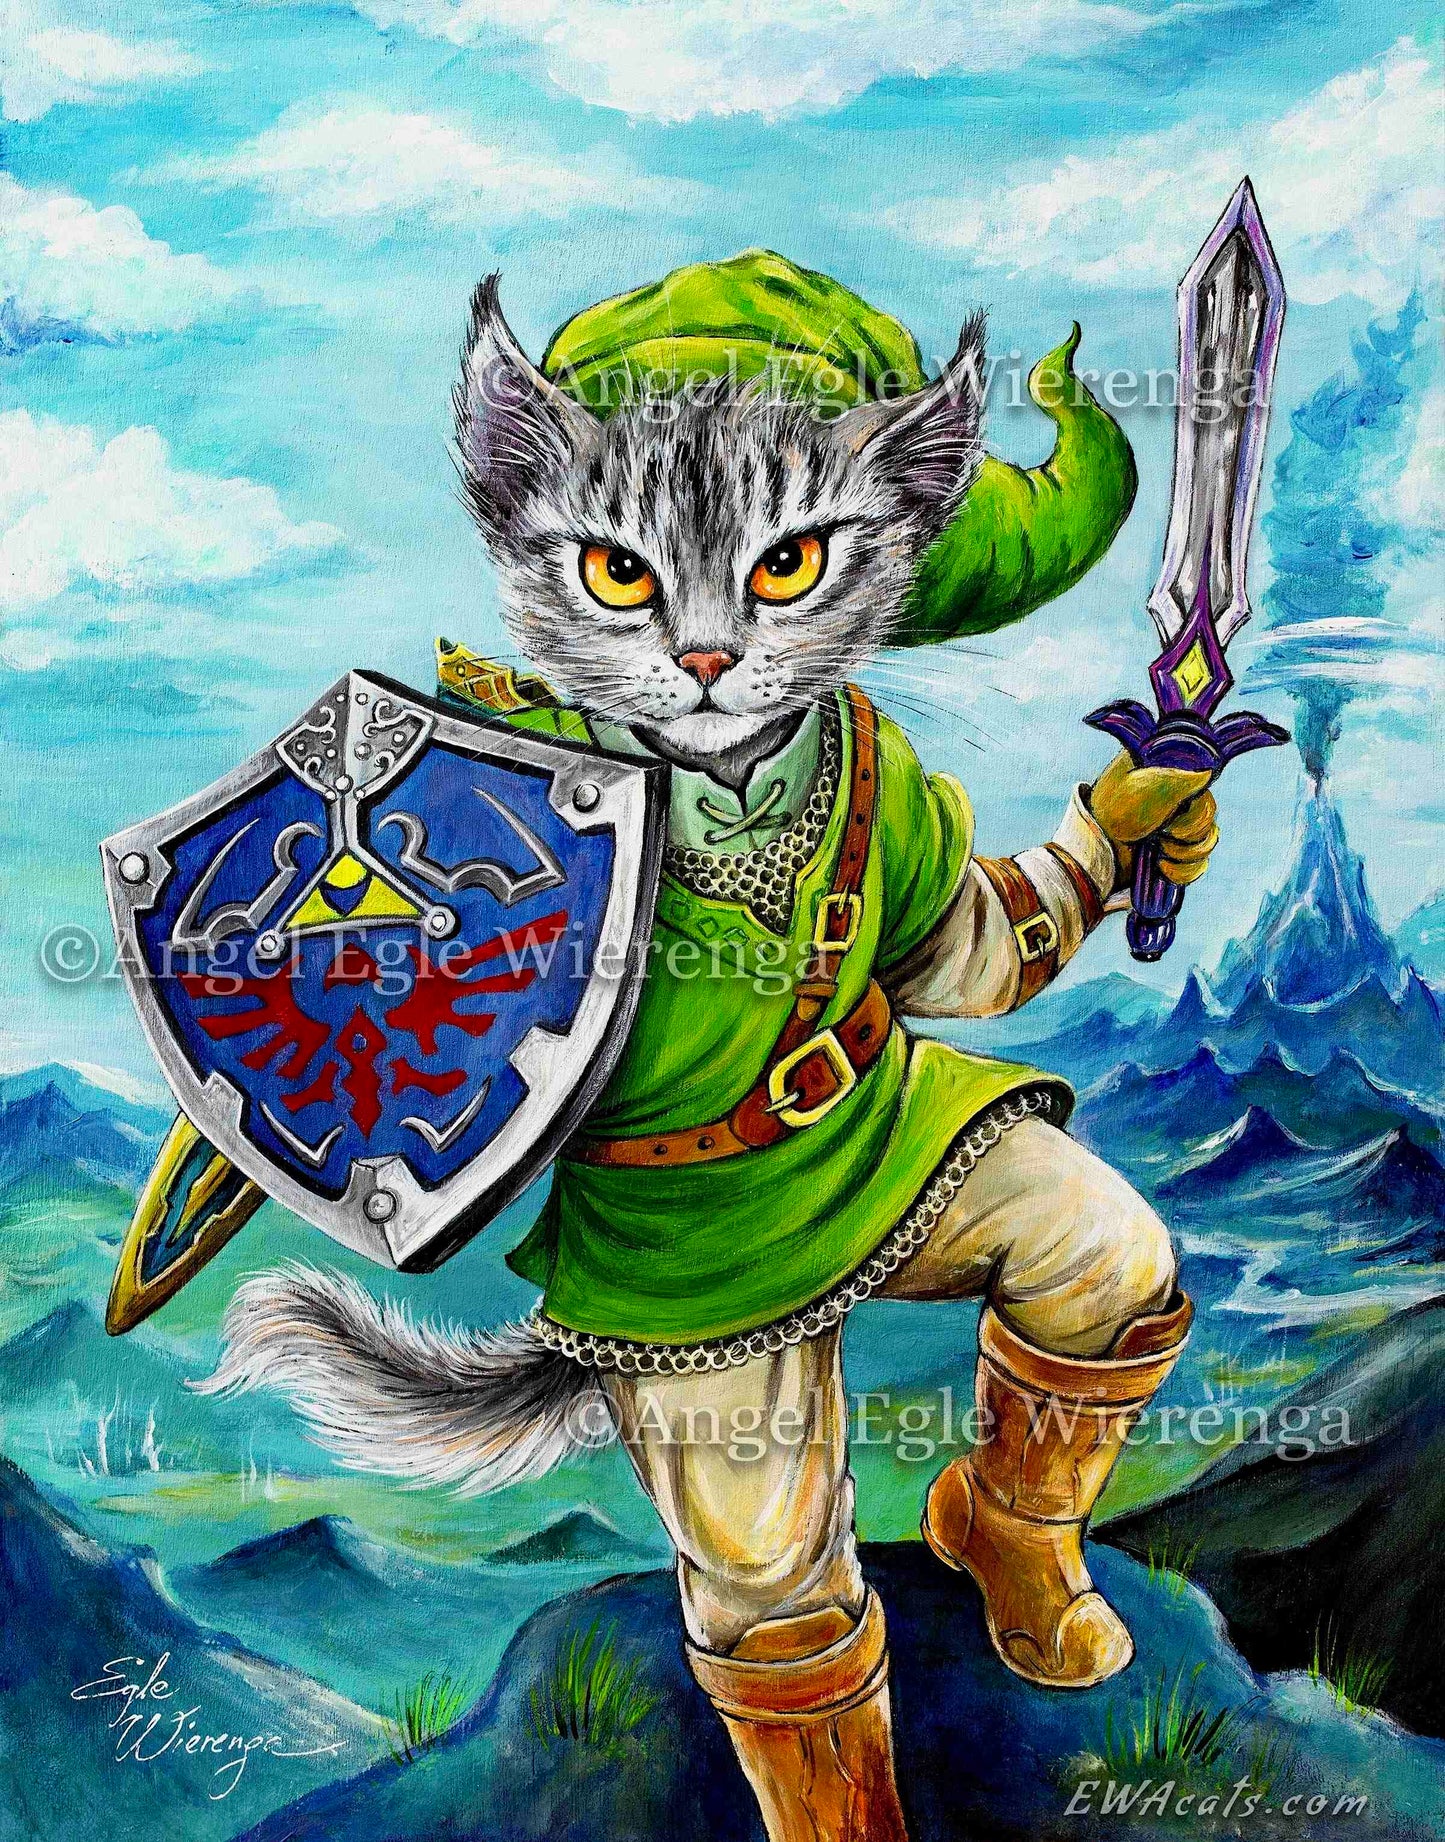 SUPREME MASTER CANVAS "Kitty Link" Limited to 5!